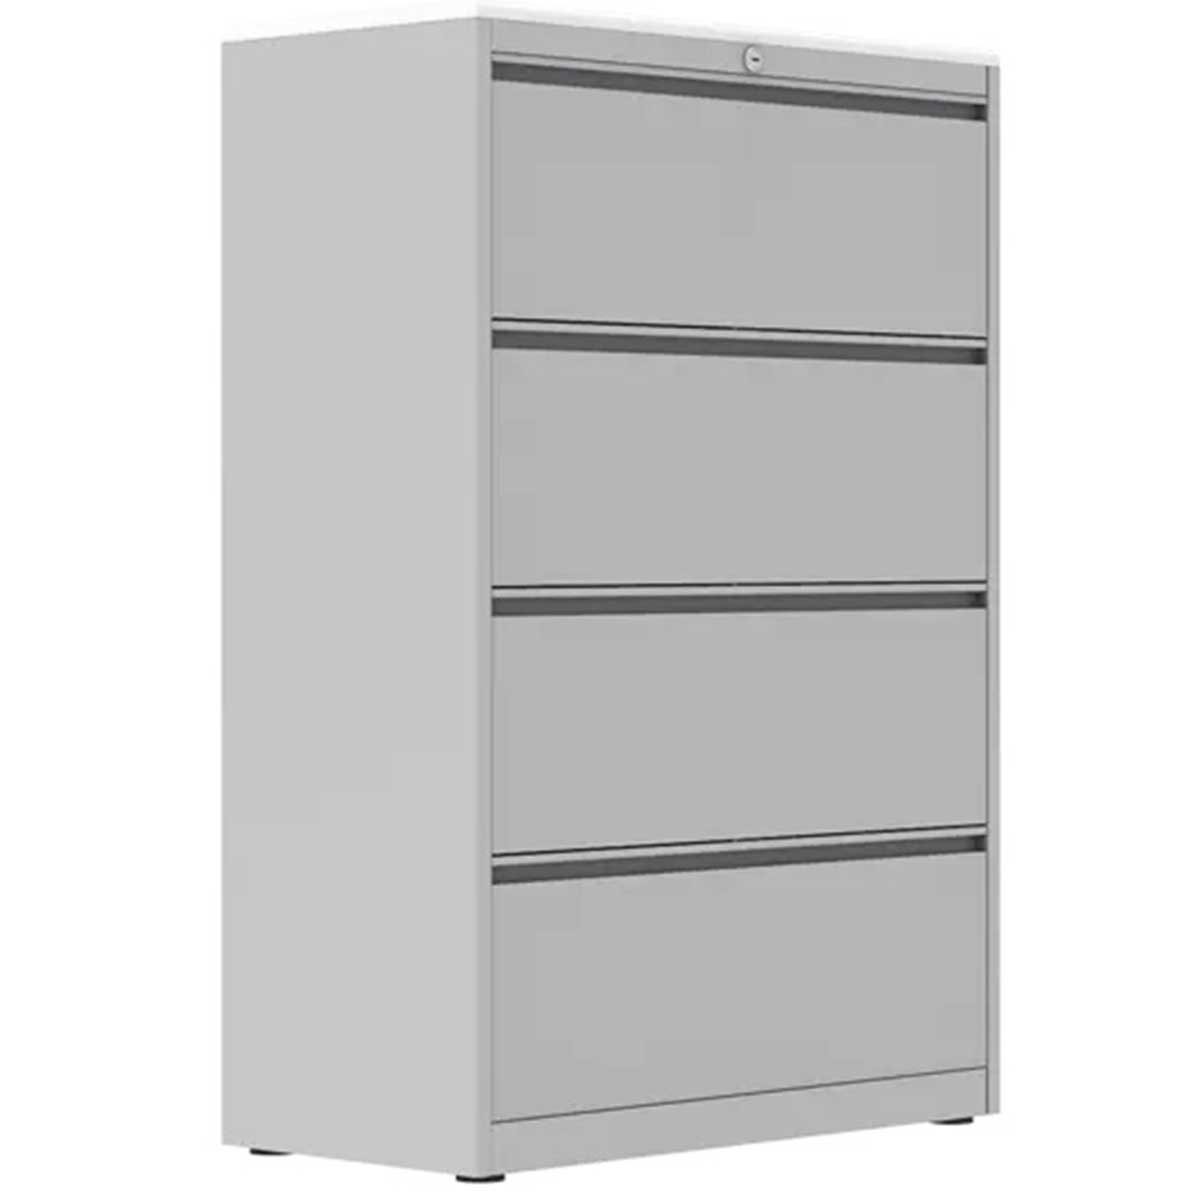 Fire Resistant File Cabinet Manufacturers, Suppliers in Vasant Vihar